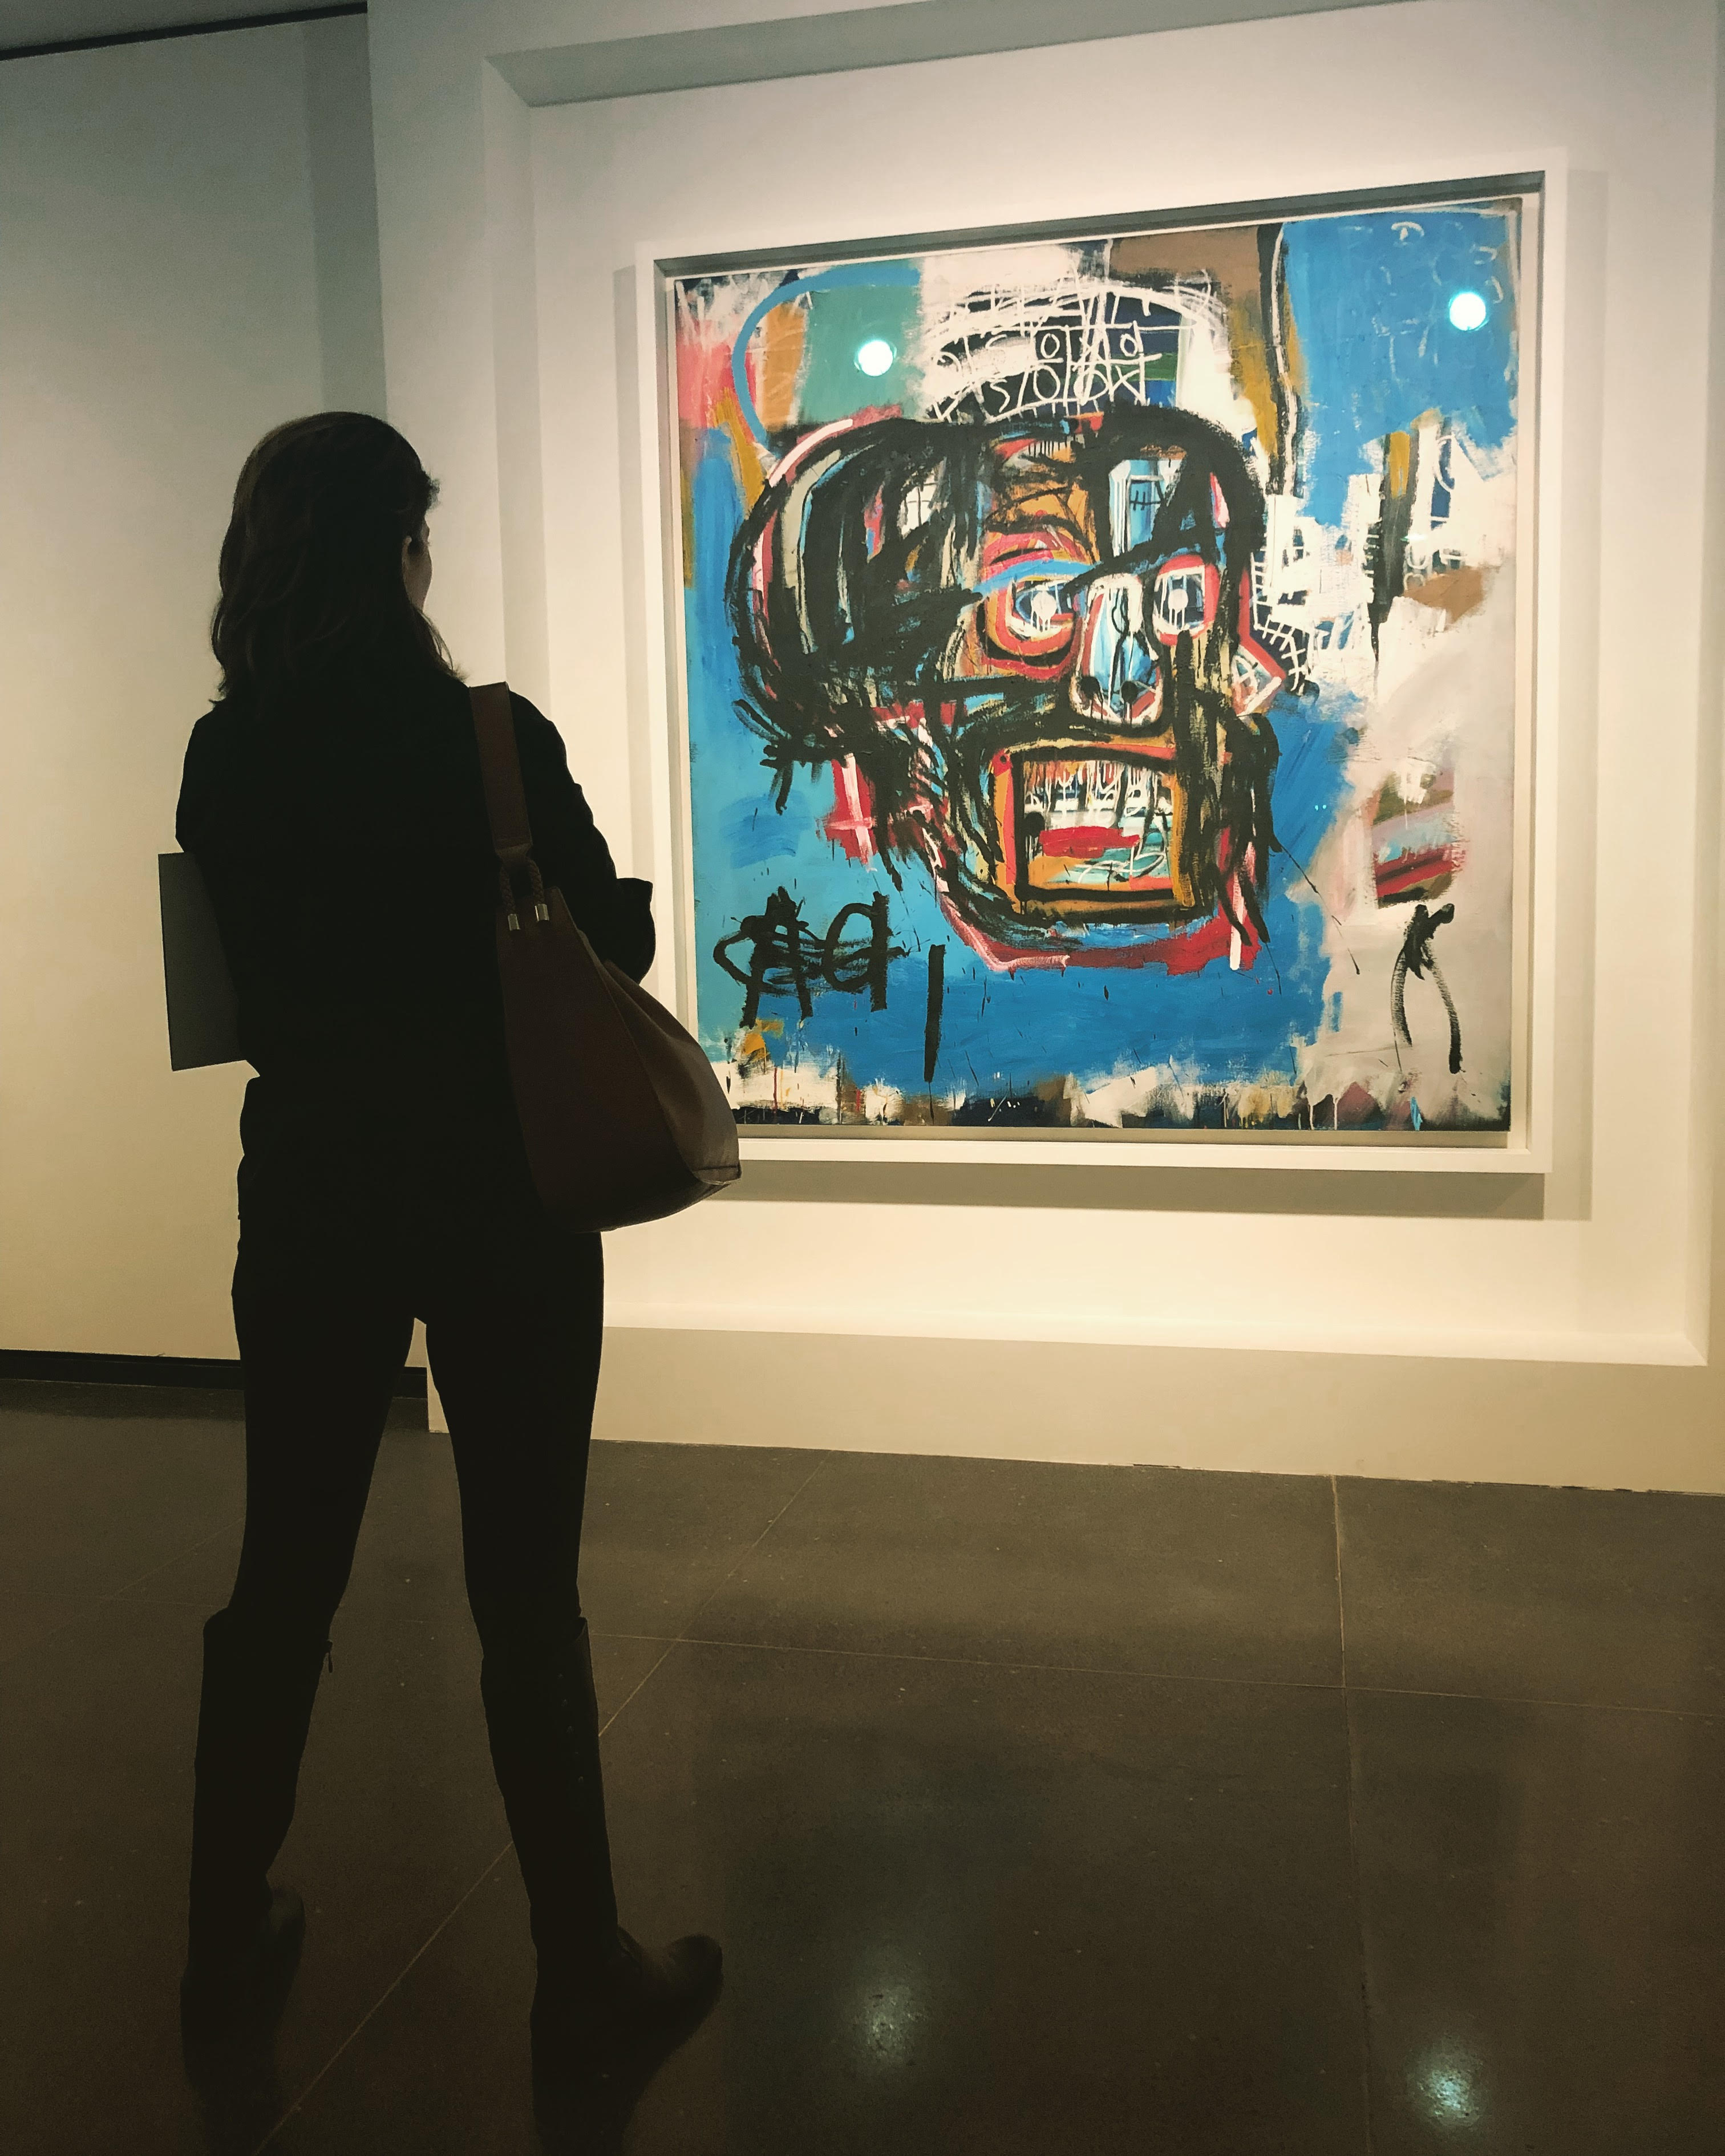 Jean-Michel Basquiat 'Untitled' Makes Its Debut At The Brooklyn Museum